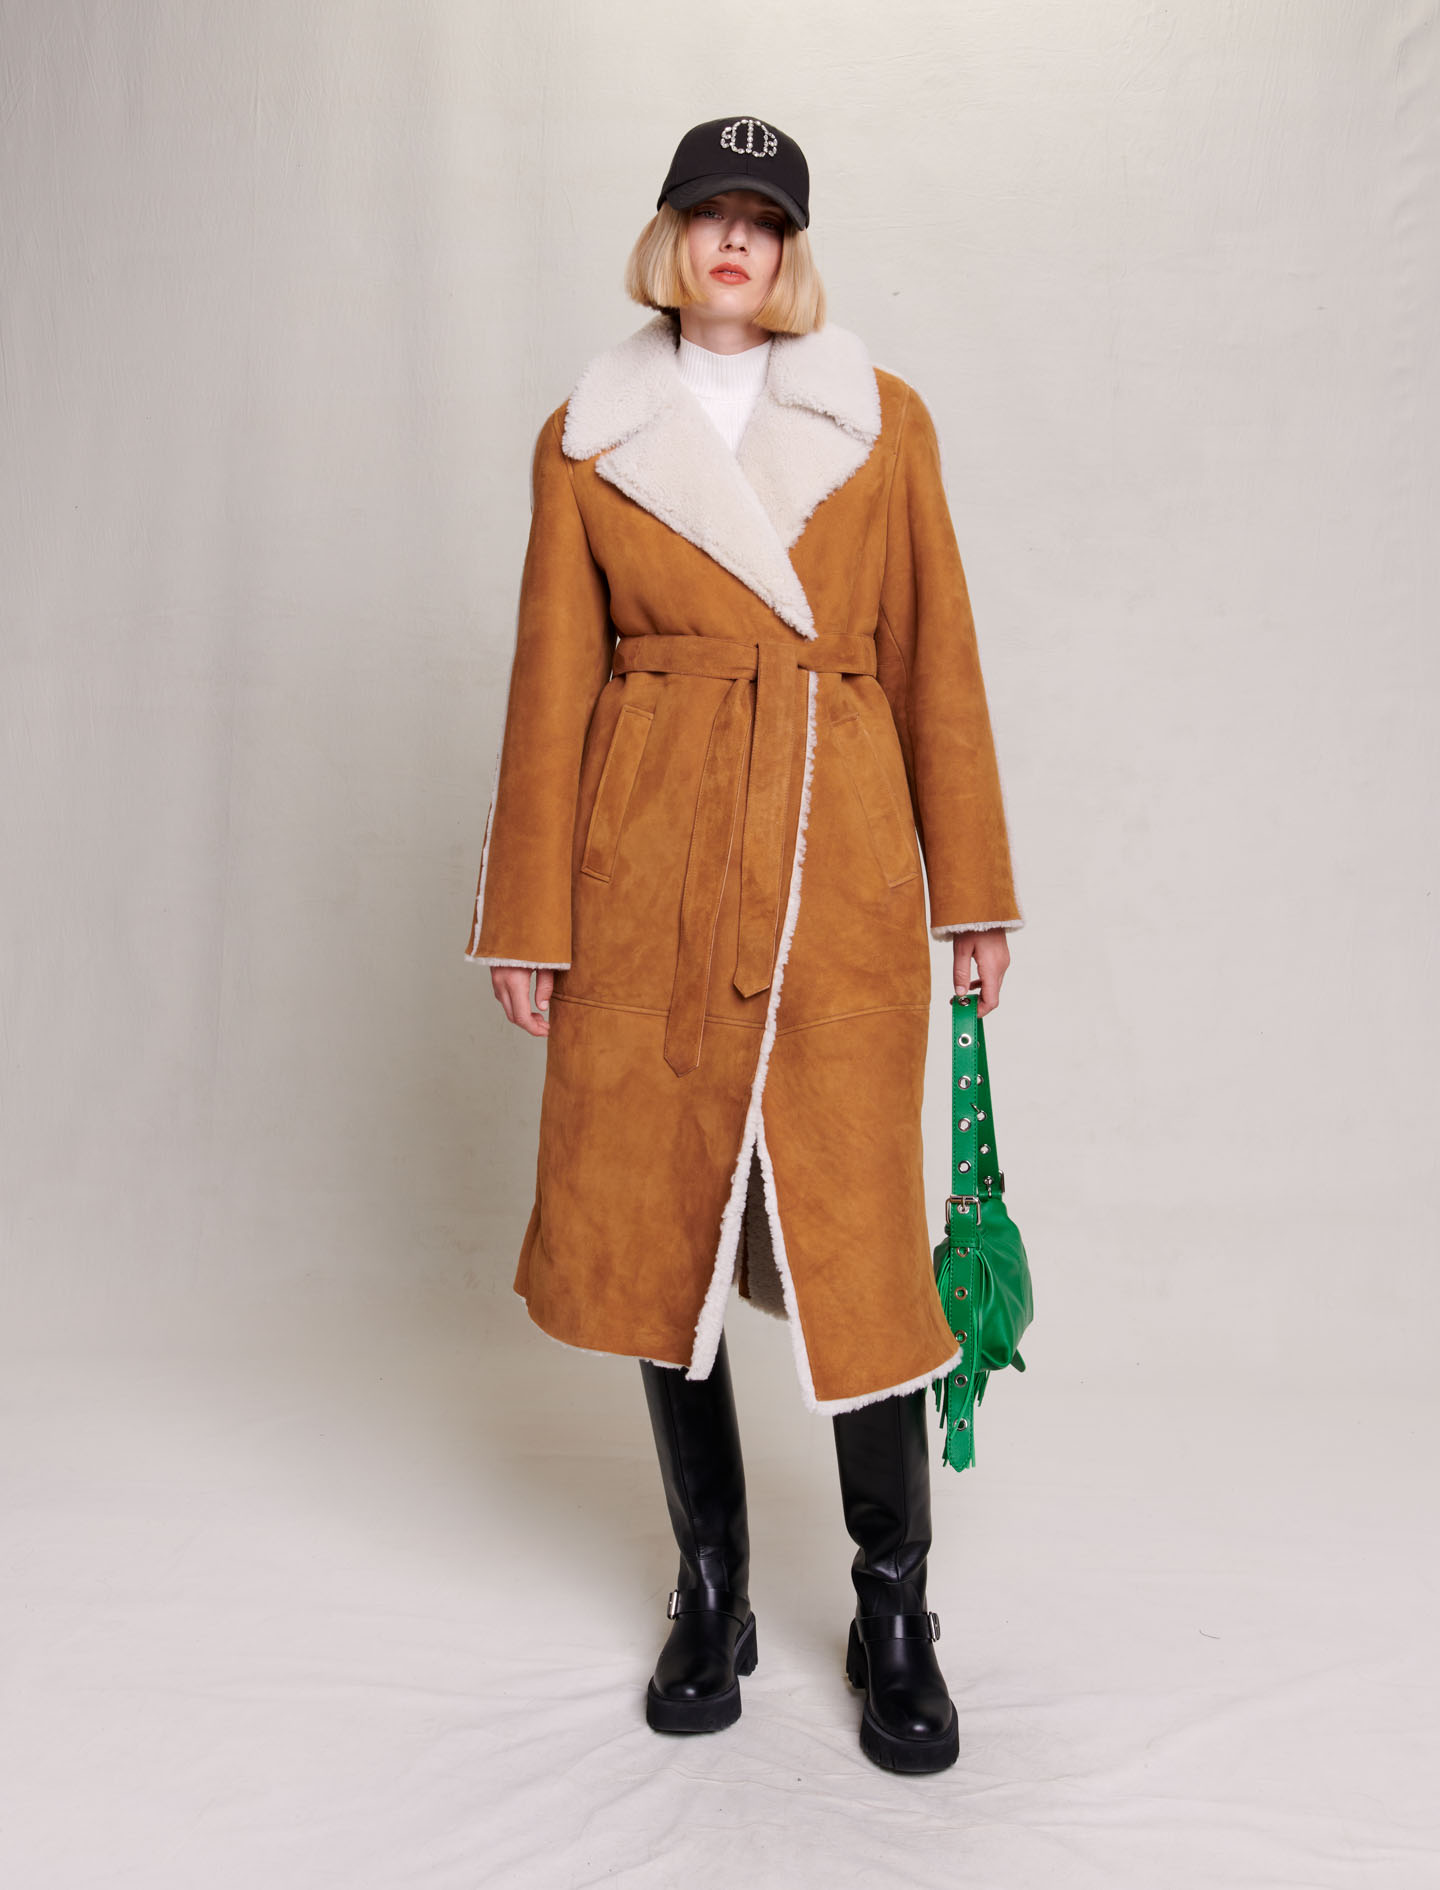 Maje Woman's lamb Pocket lining: Long fleece coat for Fall/Winter, in color Camel / Brown